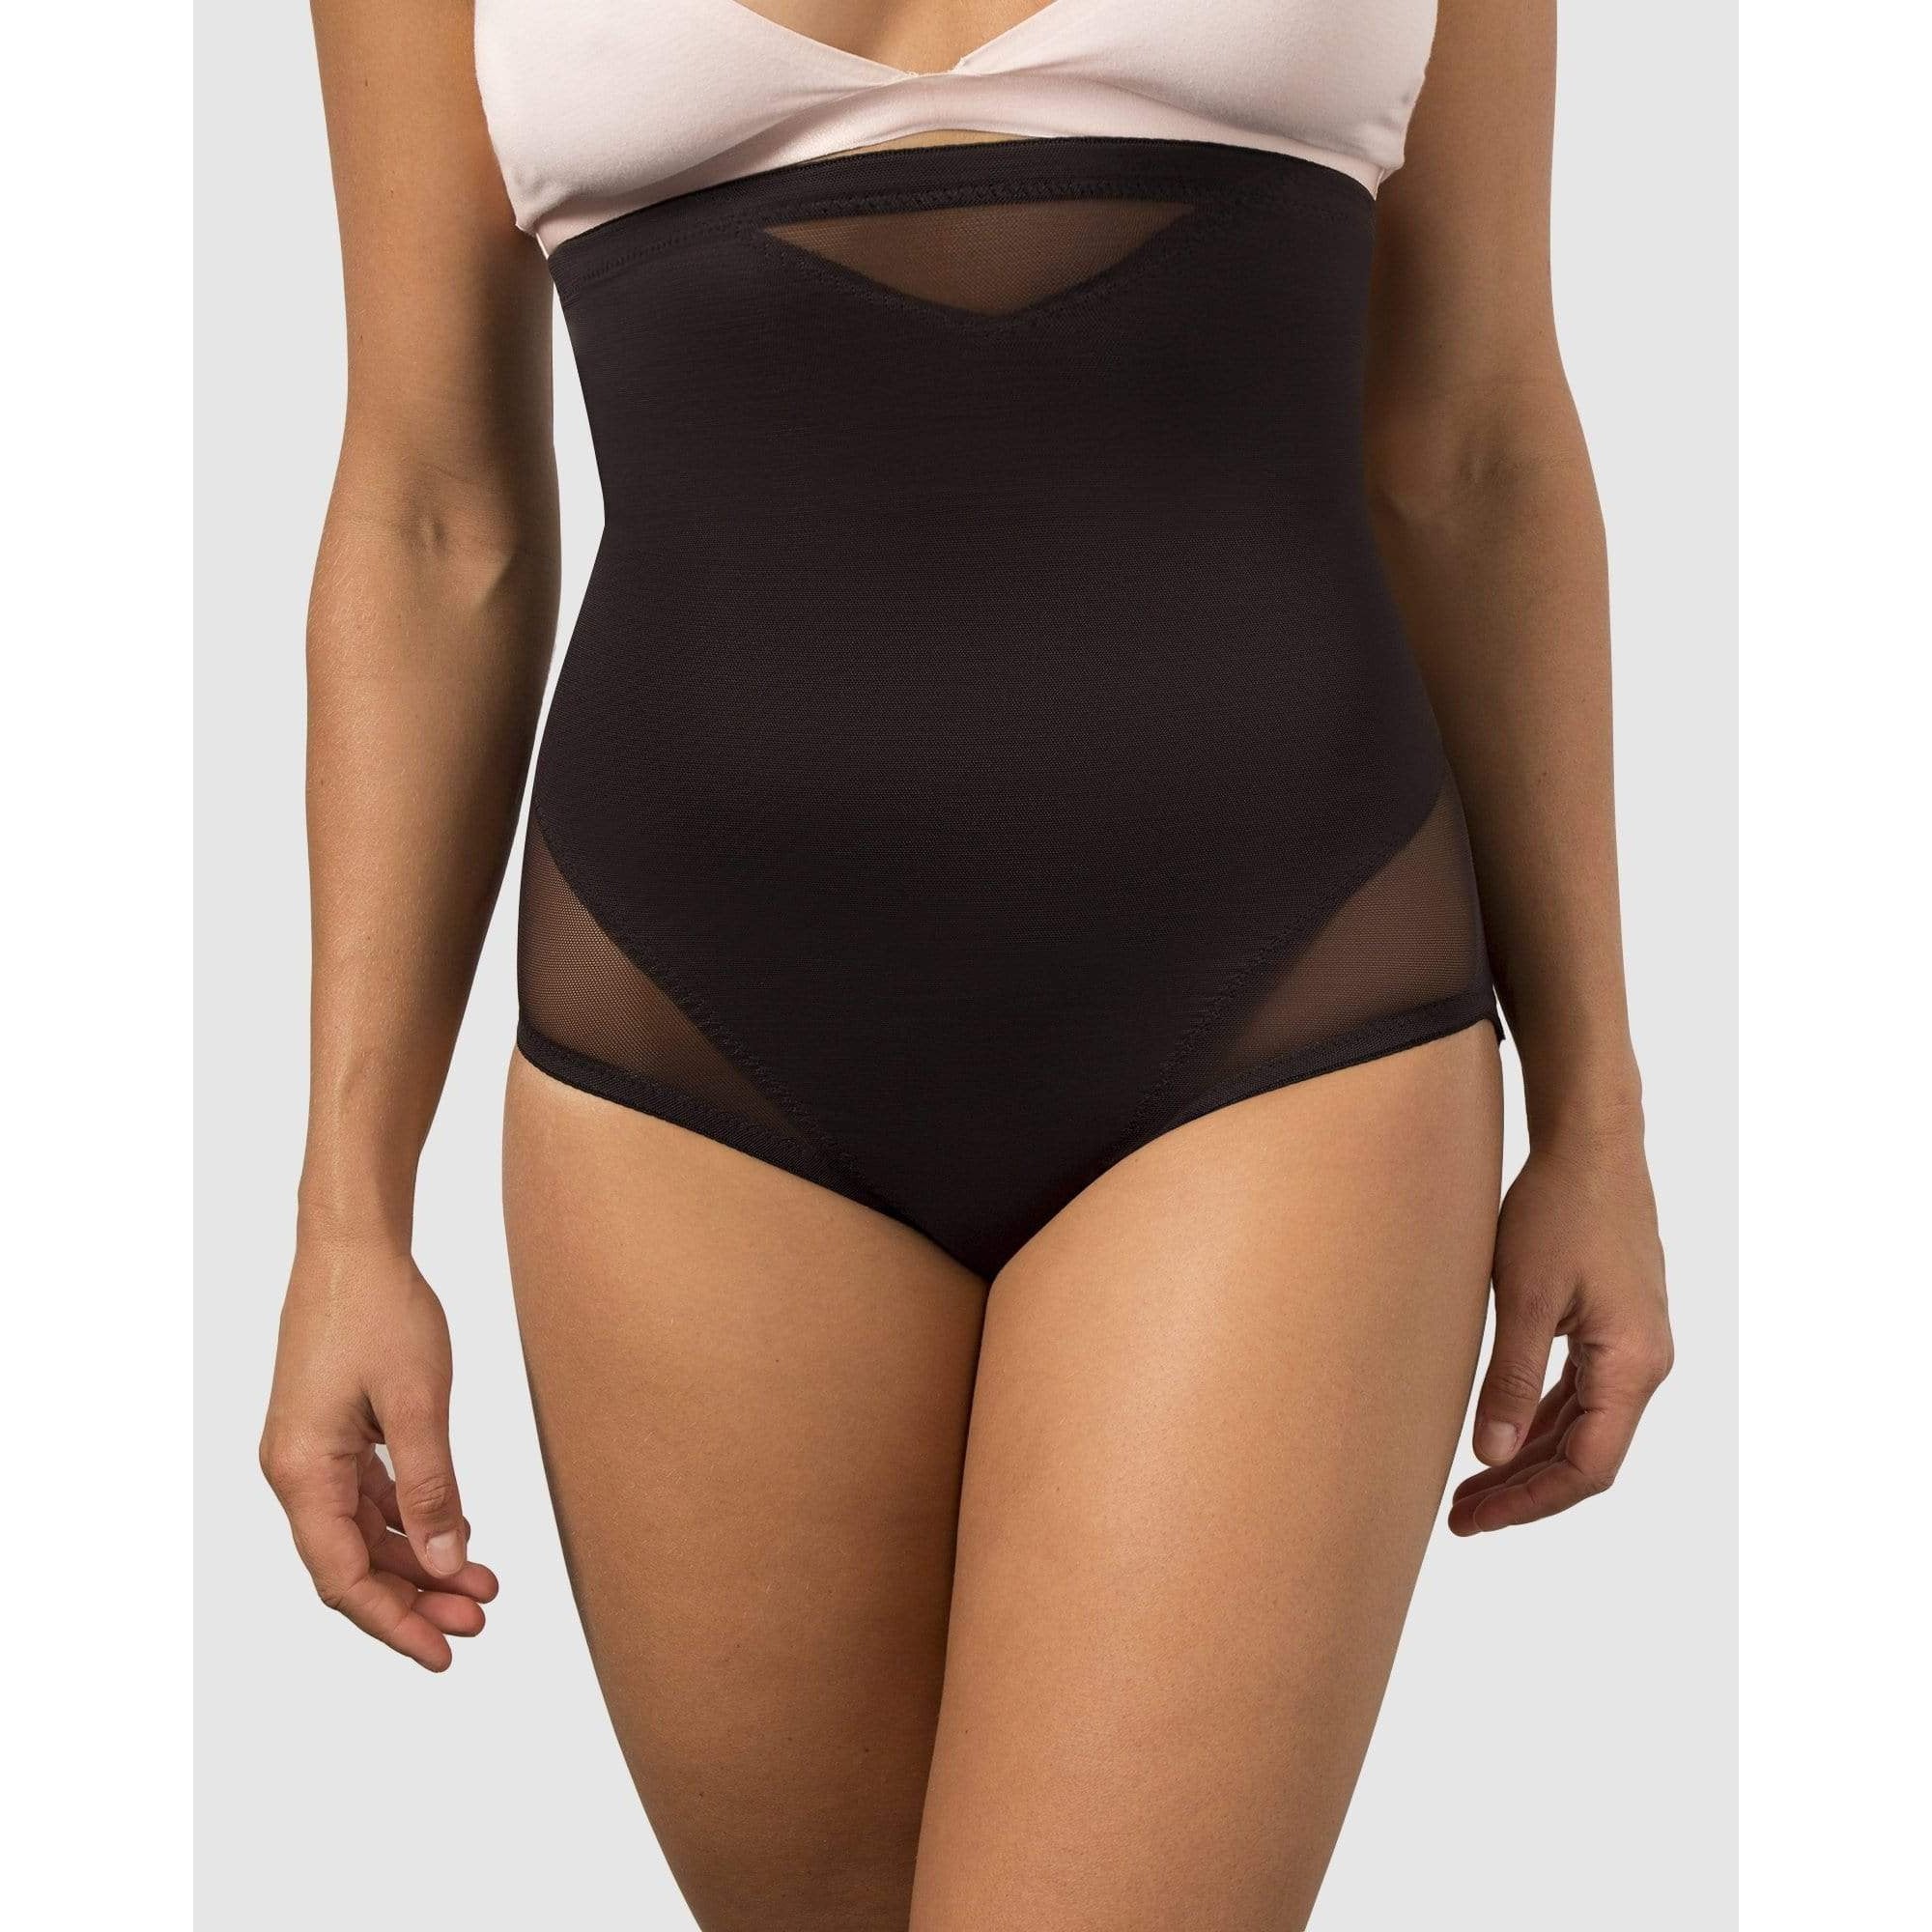 Extra Support Shaping Thong - What Waist